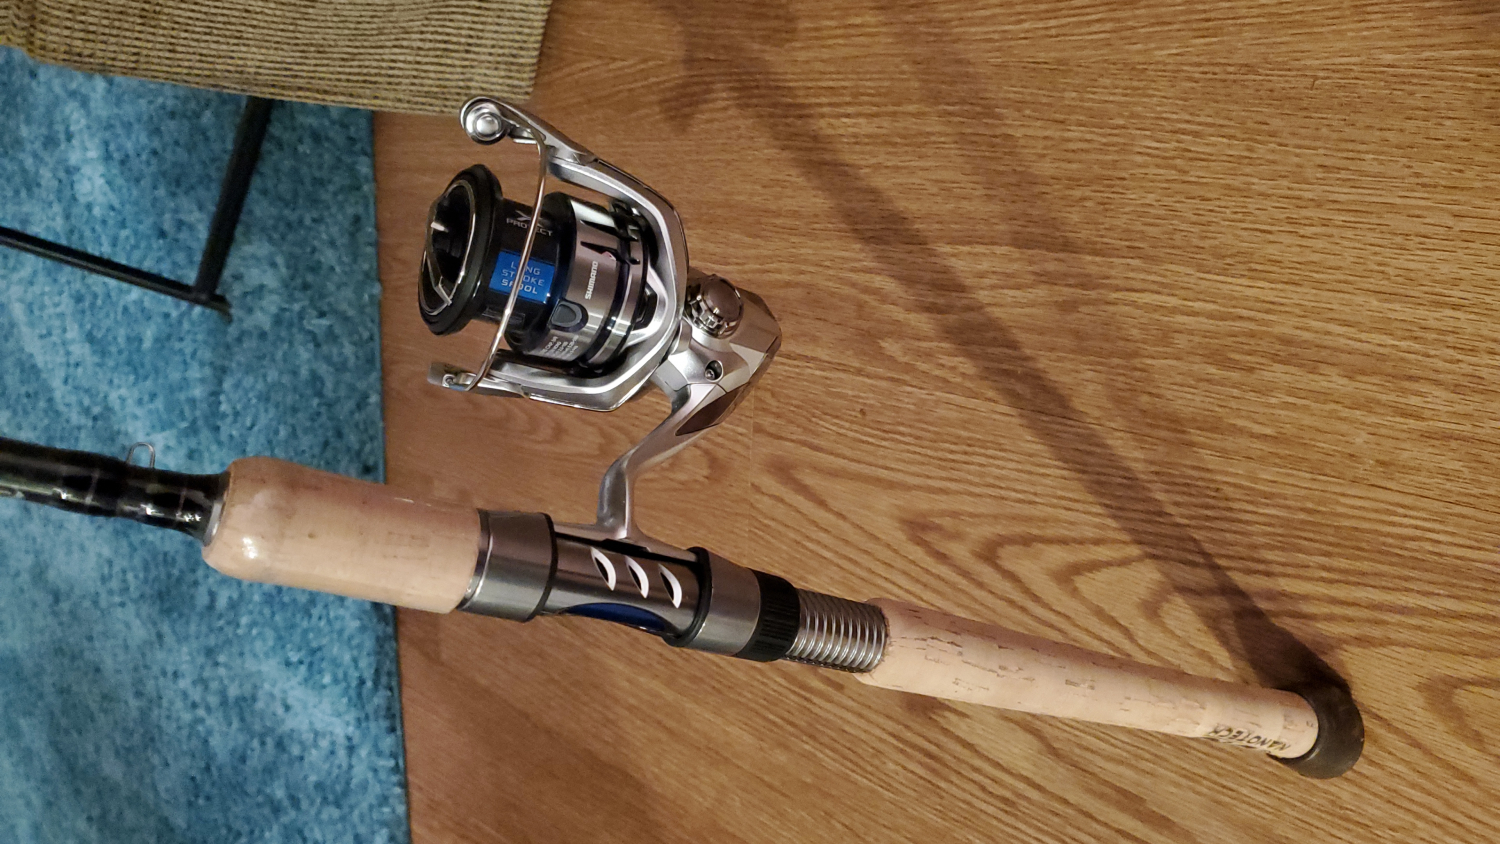 Tsunami Evict 4000 - Carbon Shield 7'6 MH Spinning Reel Combo